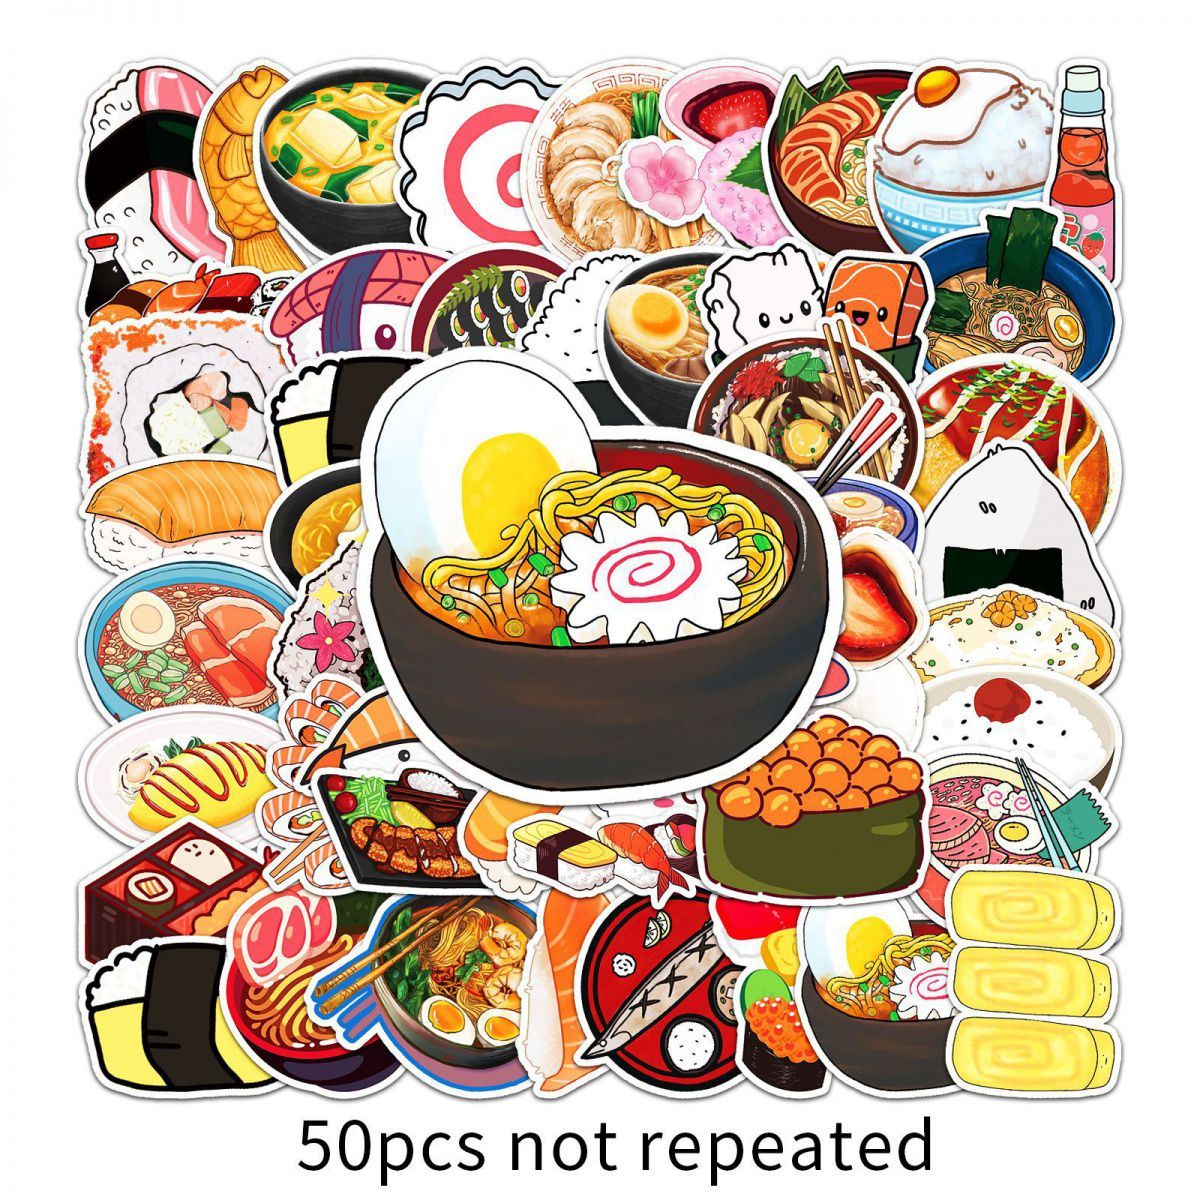 50pcs Cute Cartoon Japanese Food Stickers, Waterproof Stickers Decals For Car, Motorcycle, Laptop, Luggage, Water Bottle, Skateboard Decor Accessories